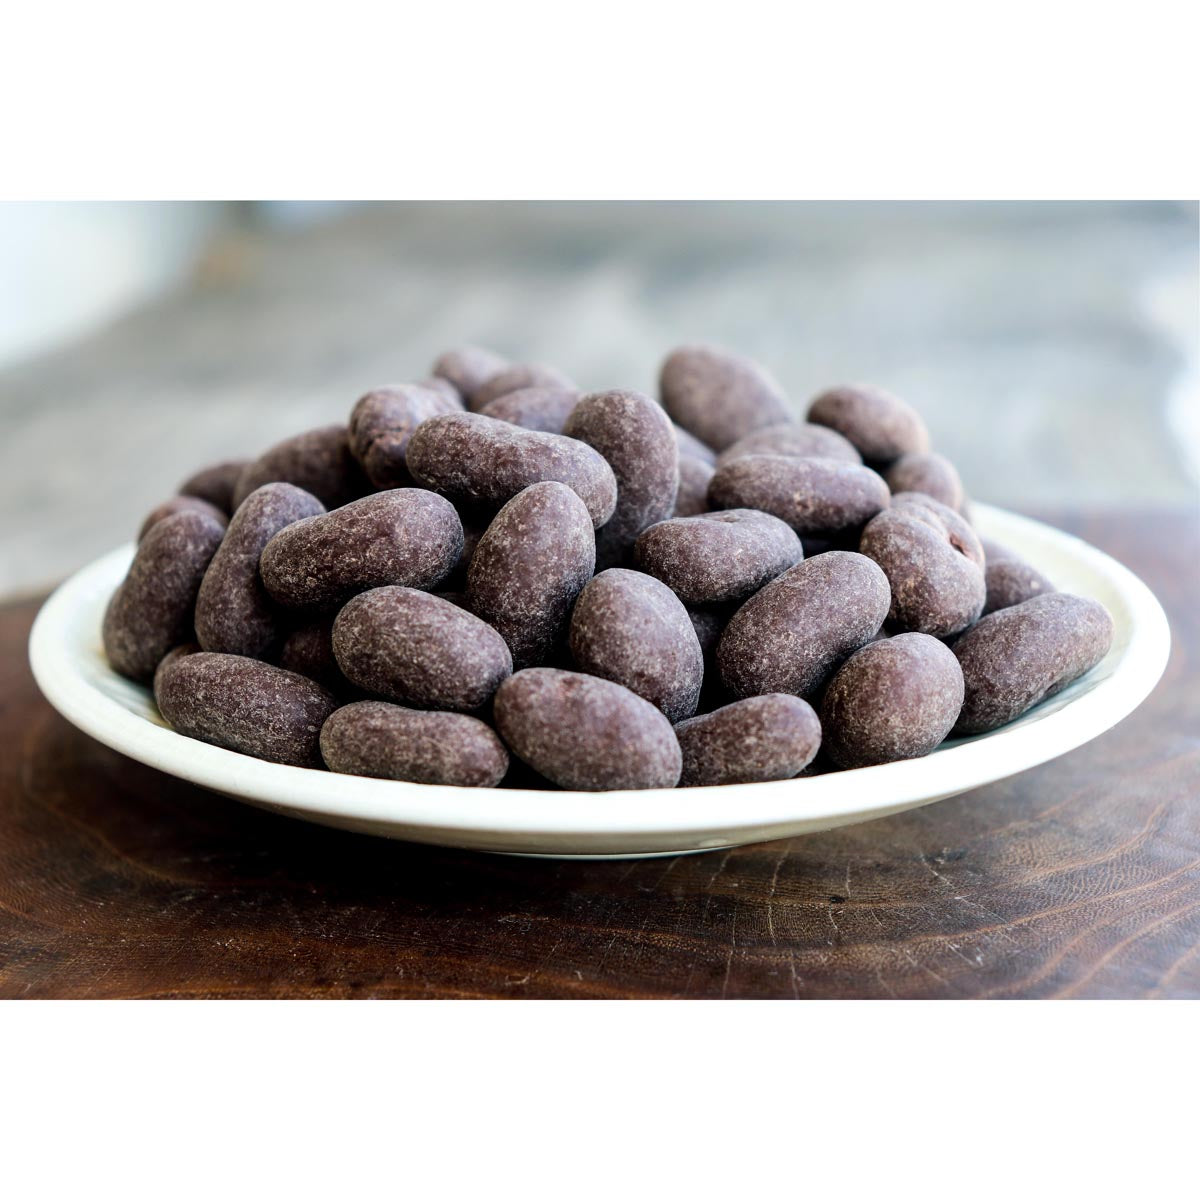 80% Chocolate Covered Cacao Beans 